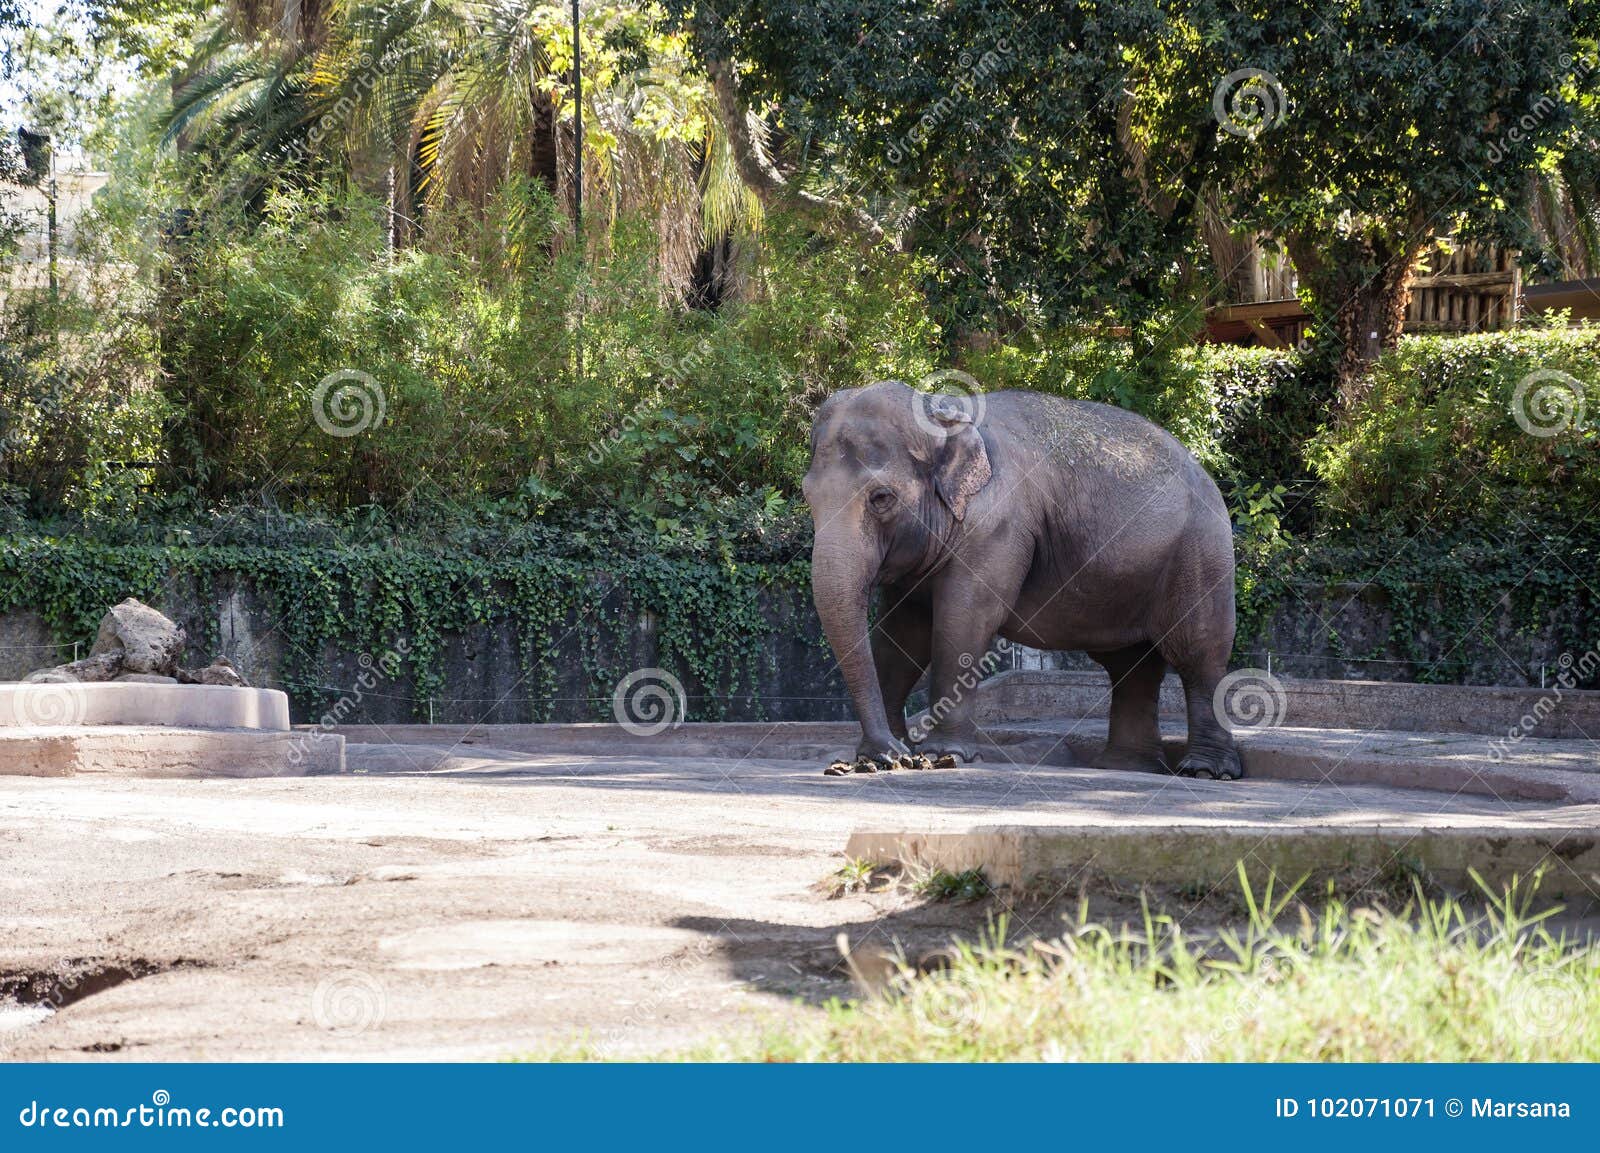 elephant at bioparco